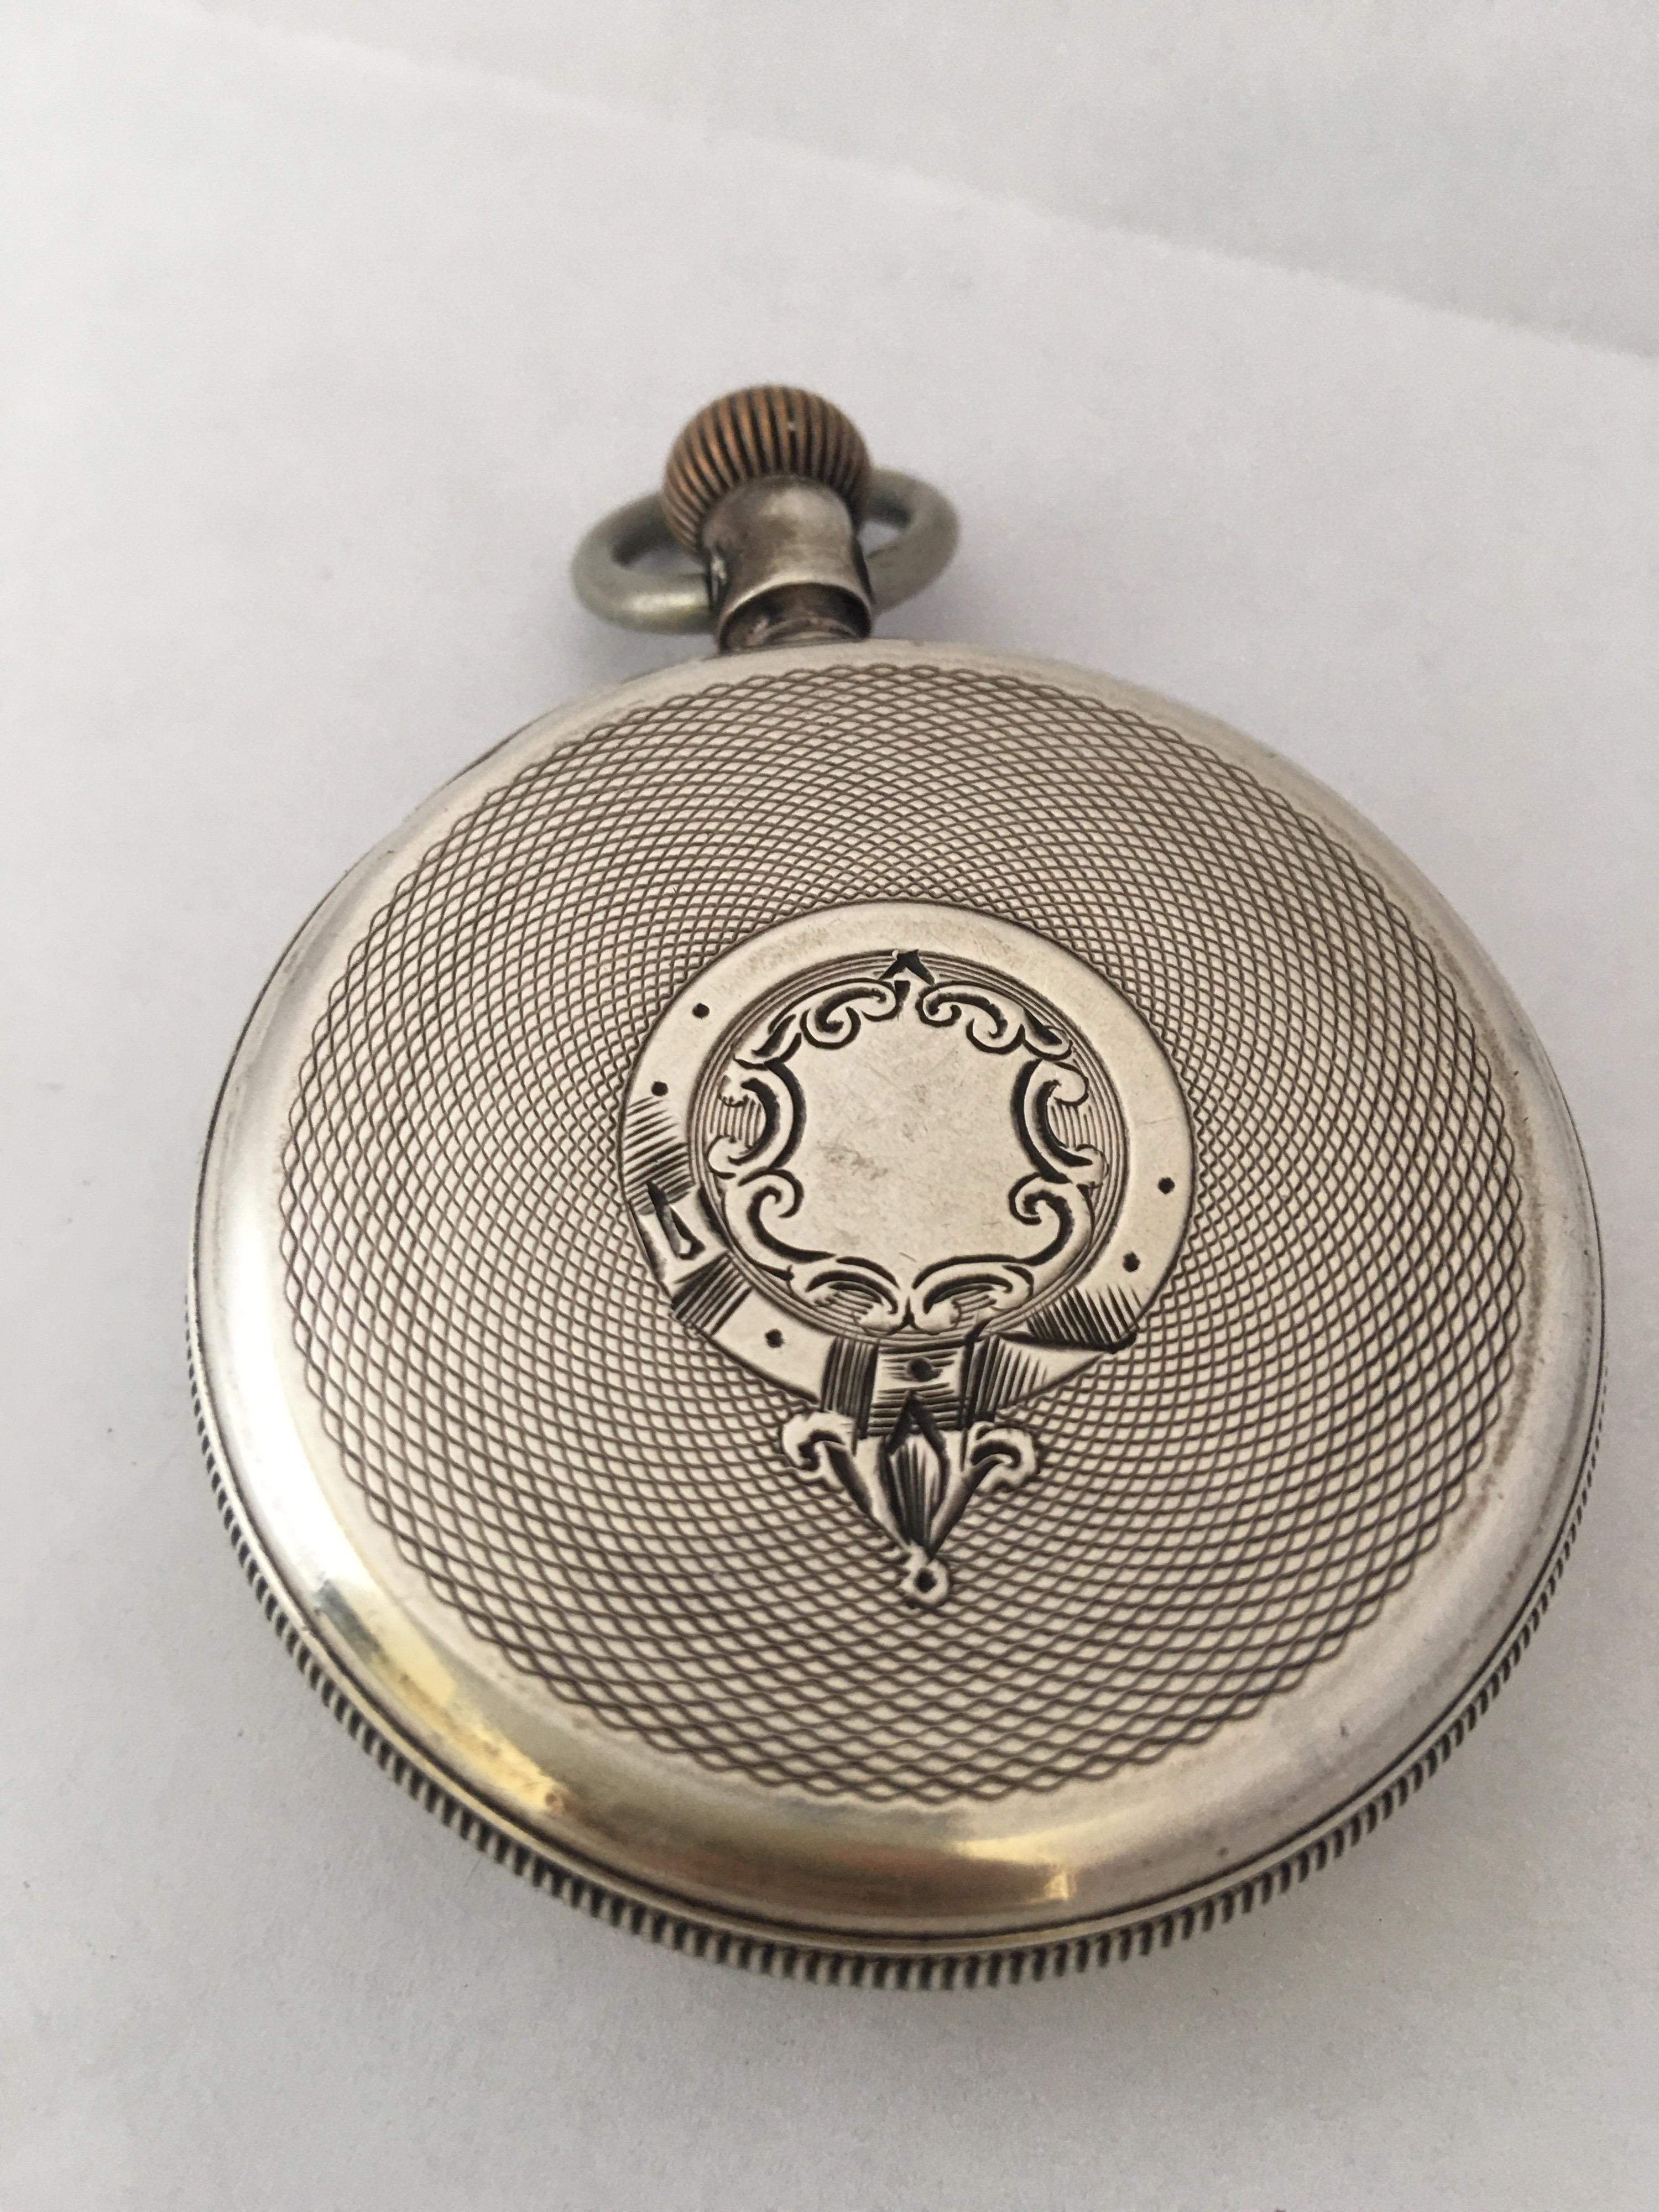 This beautiful antique silver hand-winding pocket watch is in good working condition and it is ticking and runs well. Visible signs of ageing and used with small scratches on the glass and tiny dents and scratches on the the silver watch case as